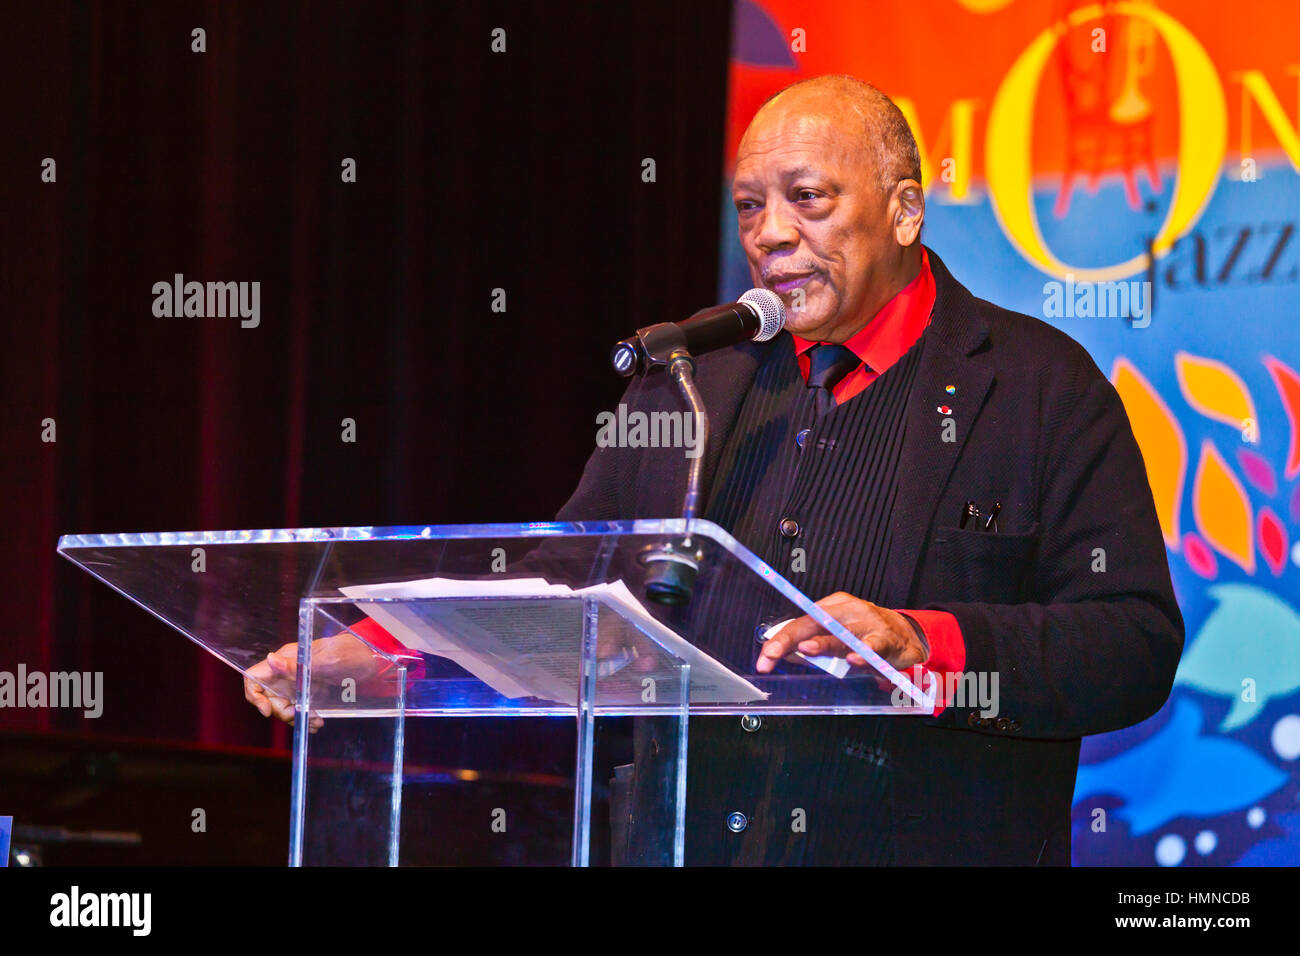 QUINCY JONES speaks while accepting a lifetime achievment award at the GALA DINNER of the 59th MONTEREY JAZZ FESTIVAL - MONTEREY, CALIFORNIA Stock Photo